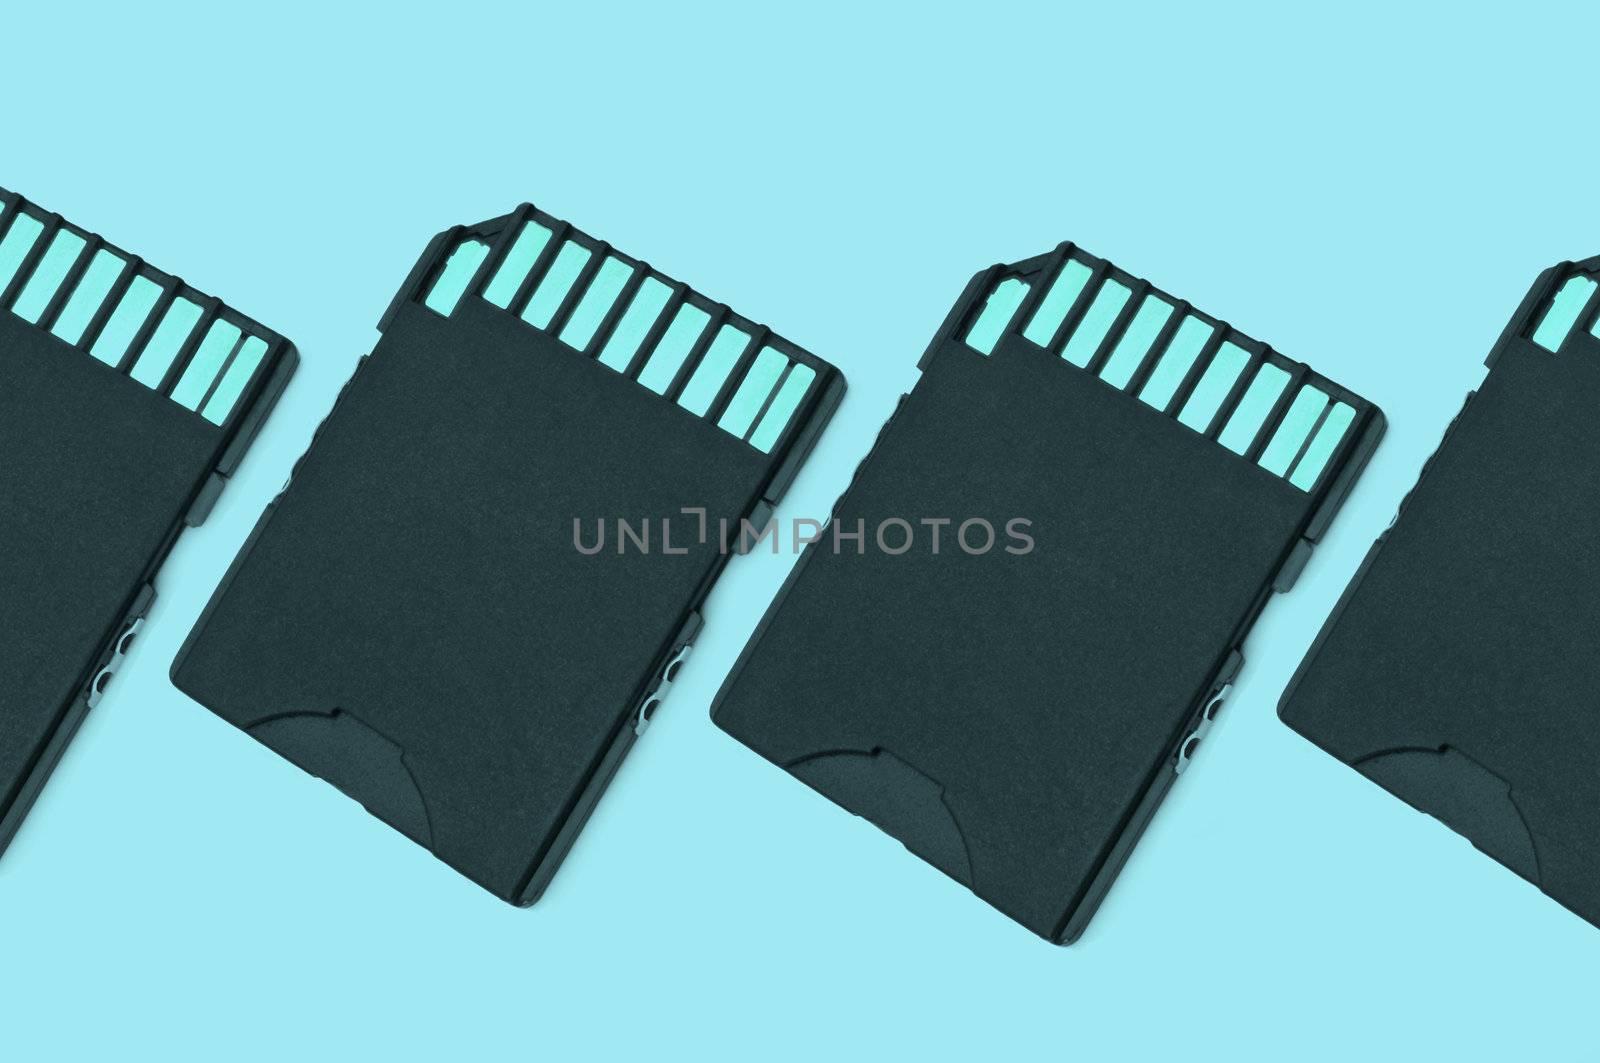 Close up on a row of black SD memory cards arranged with light blue filter